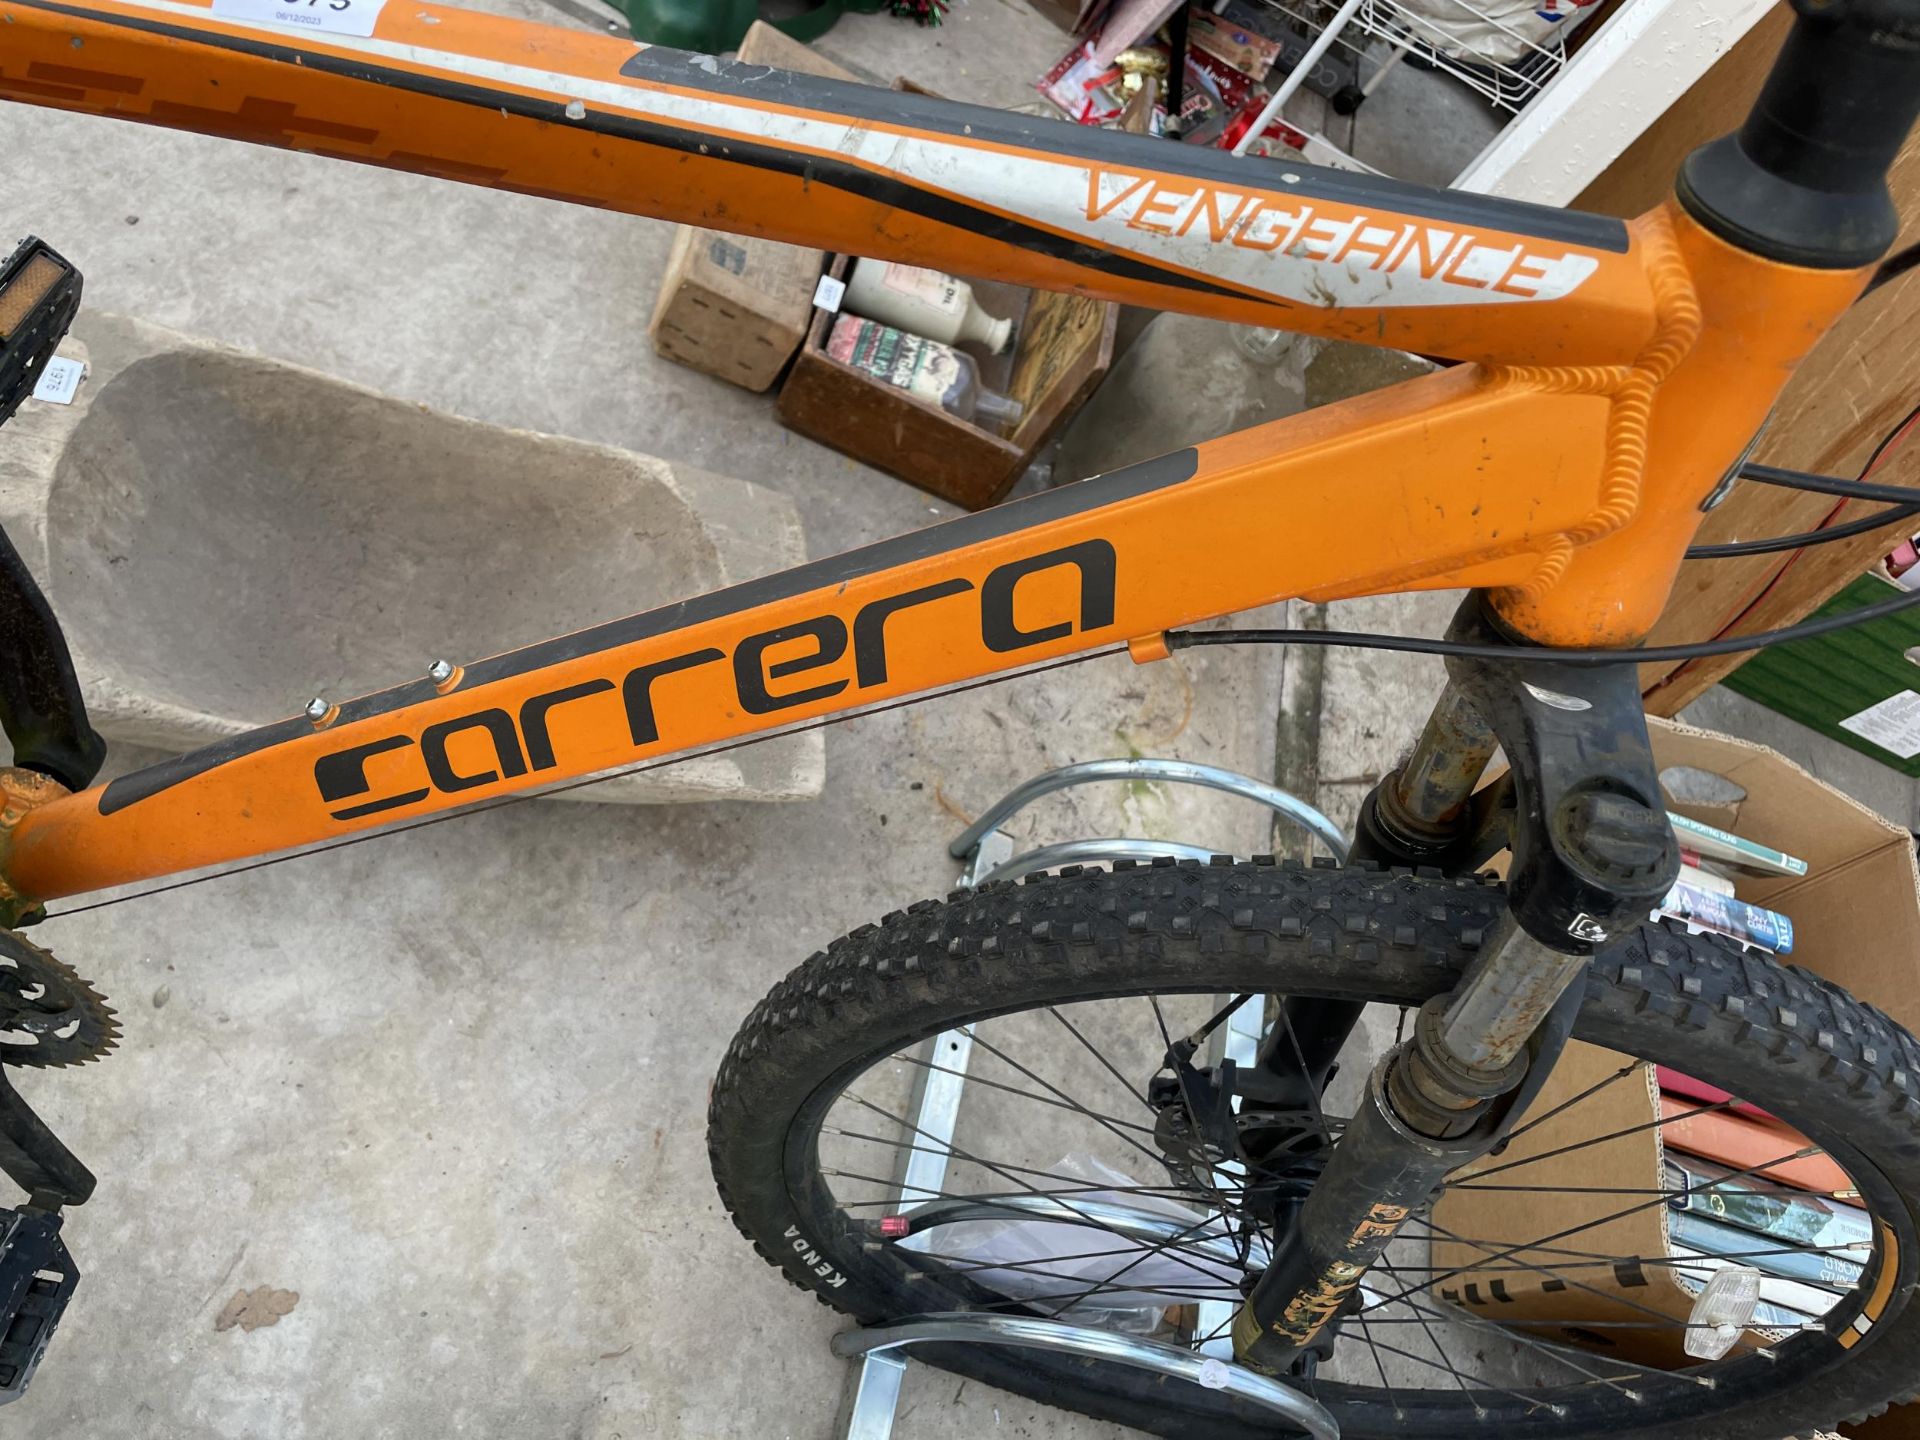 A CARRERA VENGANCE MOUNTAIN BIKE WITH FRONT SUSPENSION AND 24 SPEED GEAR SYSTEM - Image 3 of 4